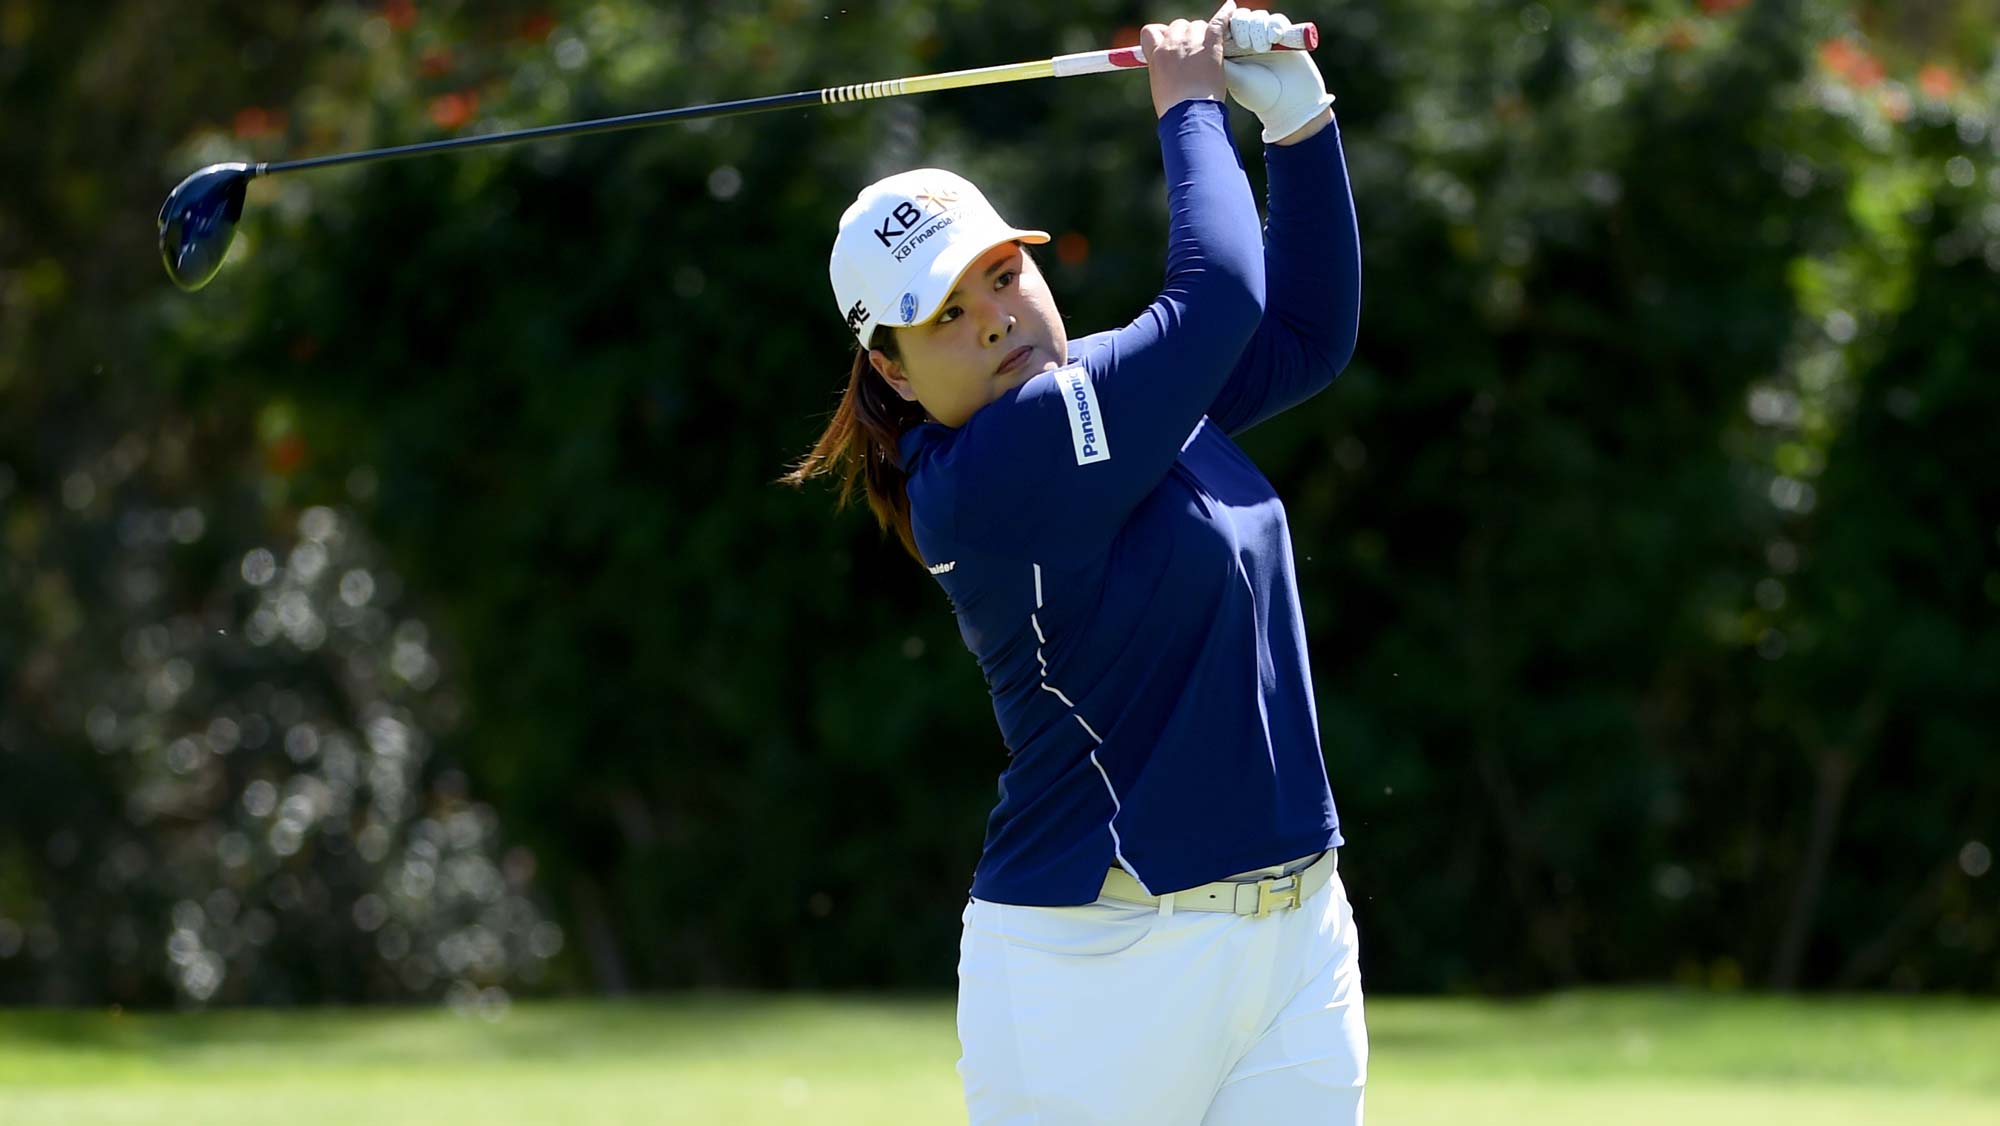 Inbee Park of Korea hits walks off the tee box on the fourth hole during the final round of the Kia Classic